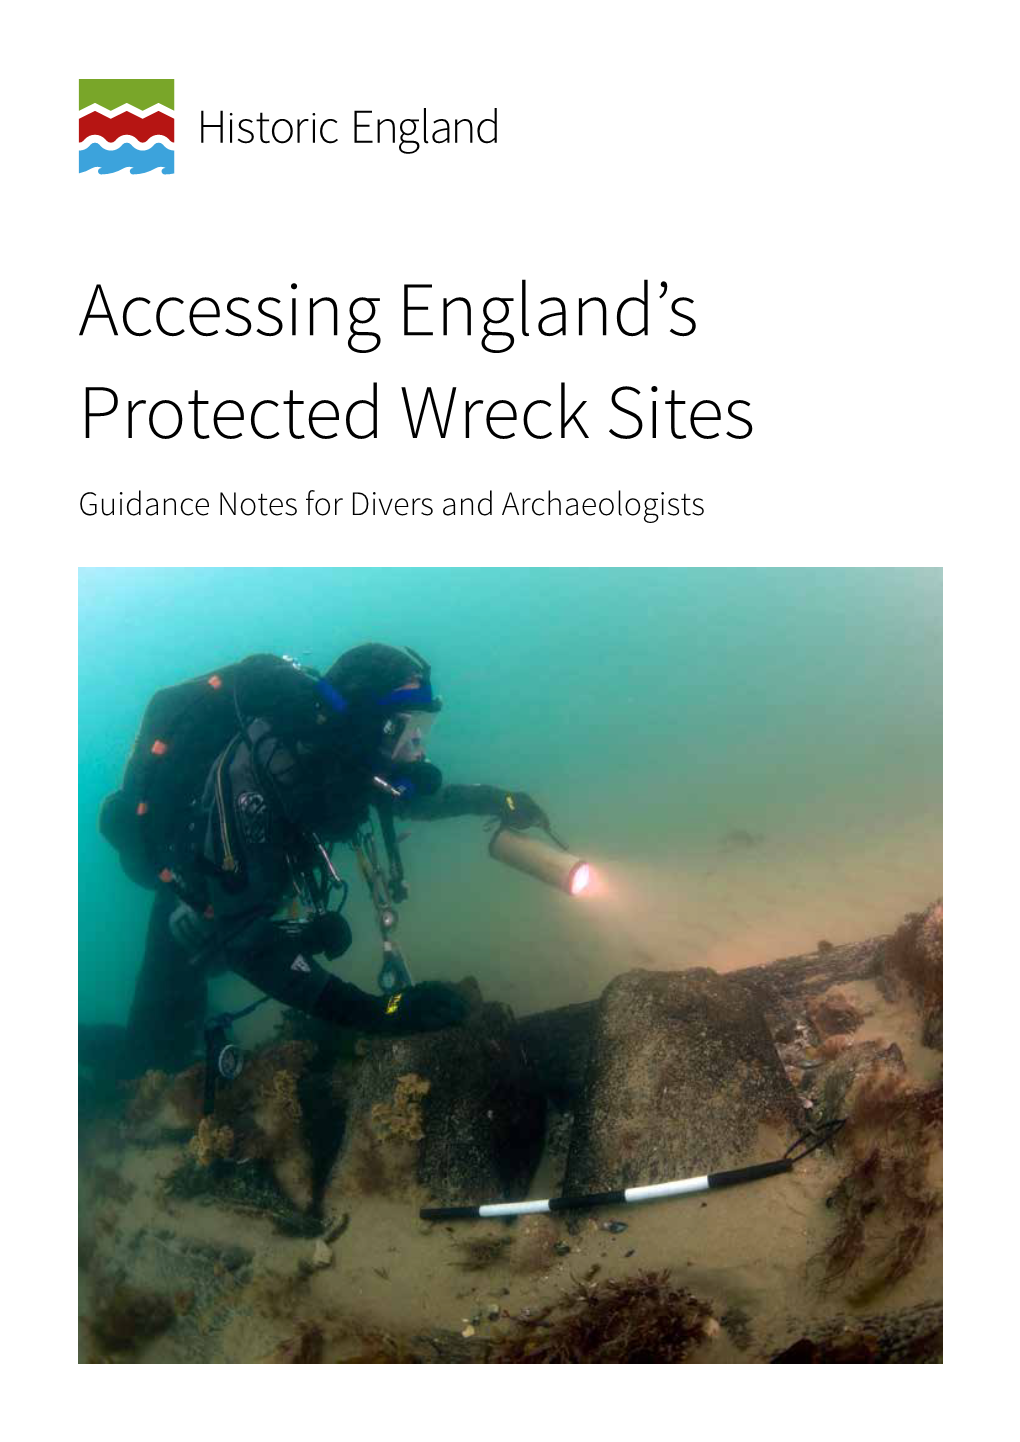 Accessing England's Protected Wreck Sites: Guidance Notes for Divers and Archaeologists